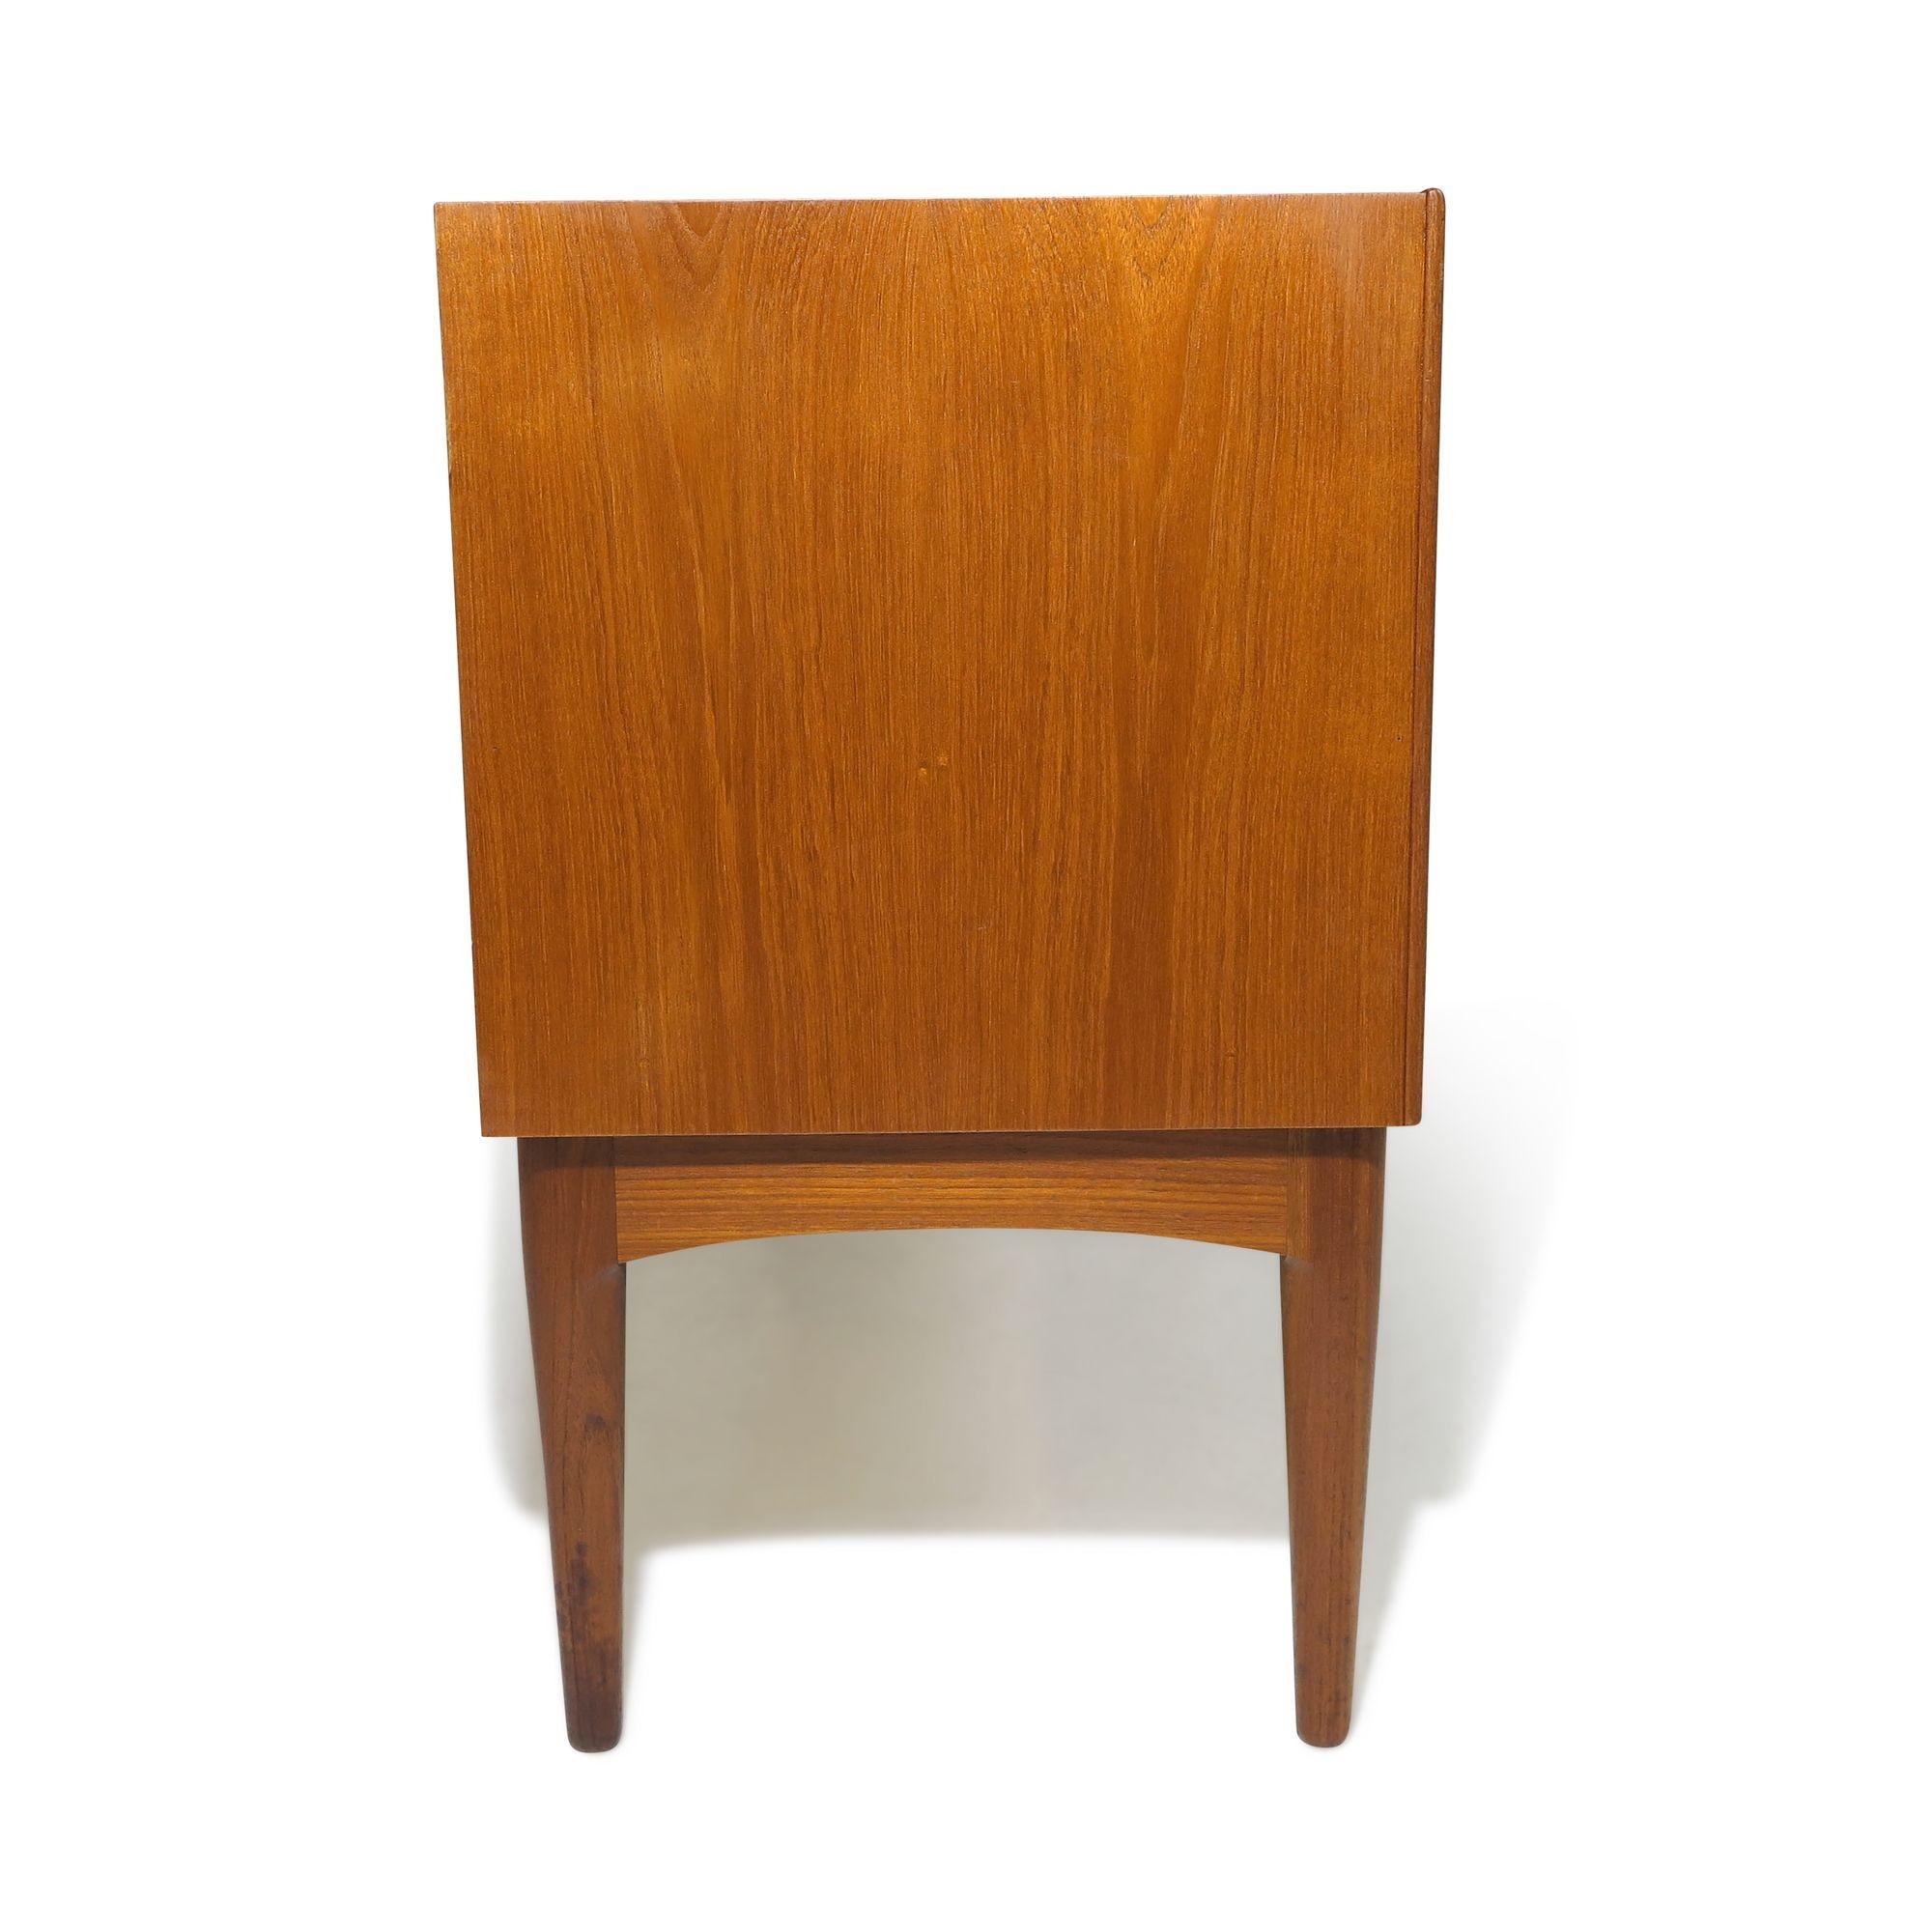 Johannes Andersen Teak Credenza with Sculpted Pulls In Excellent Condition For Sale In Oakland, CA